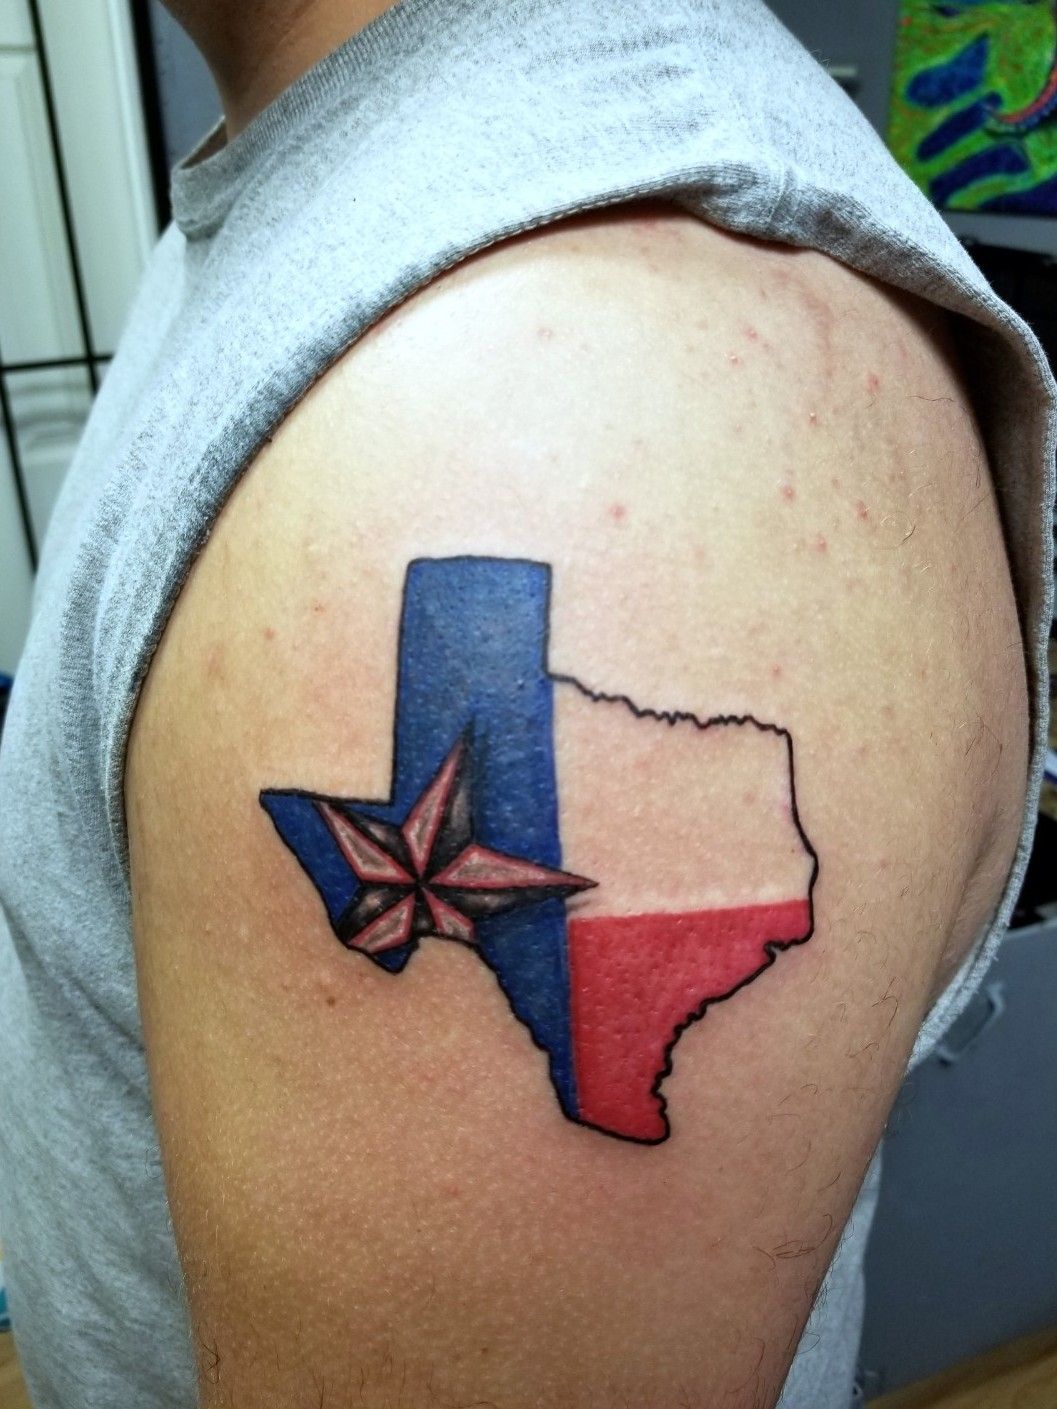 Texas Outline for Tattoo  bhs907  Flickr